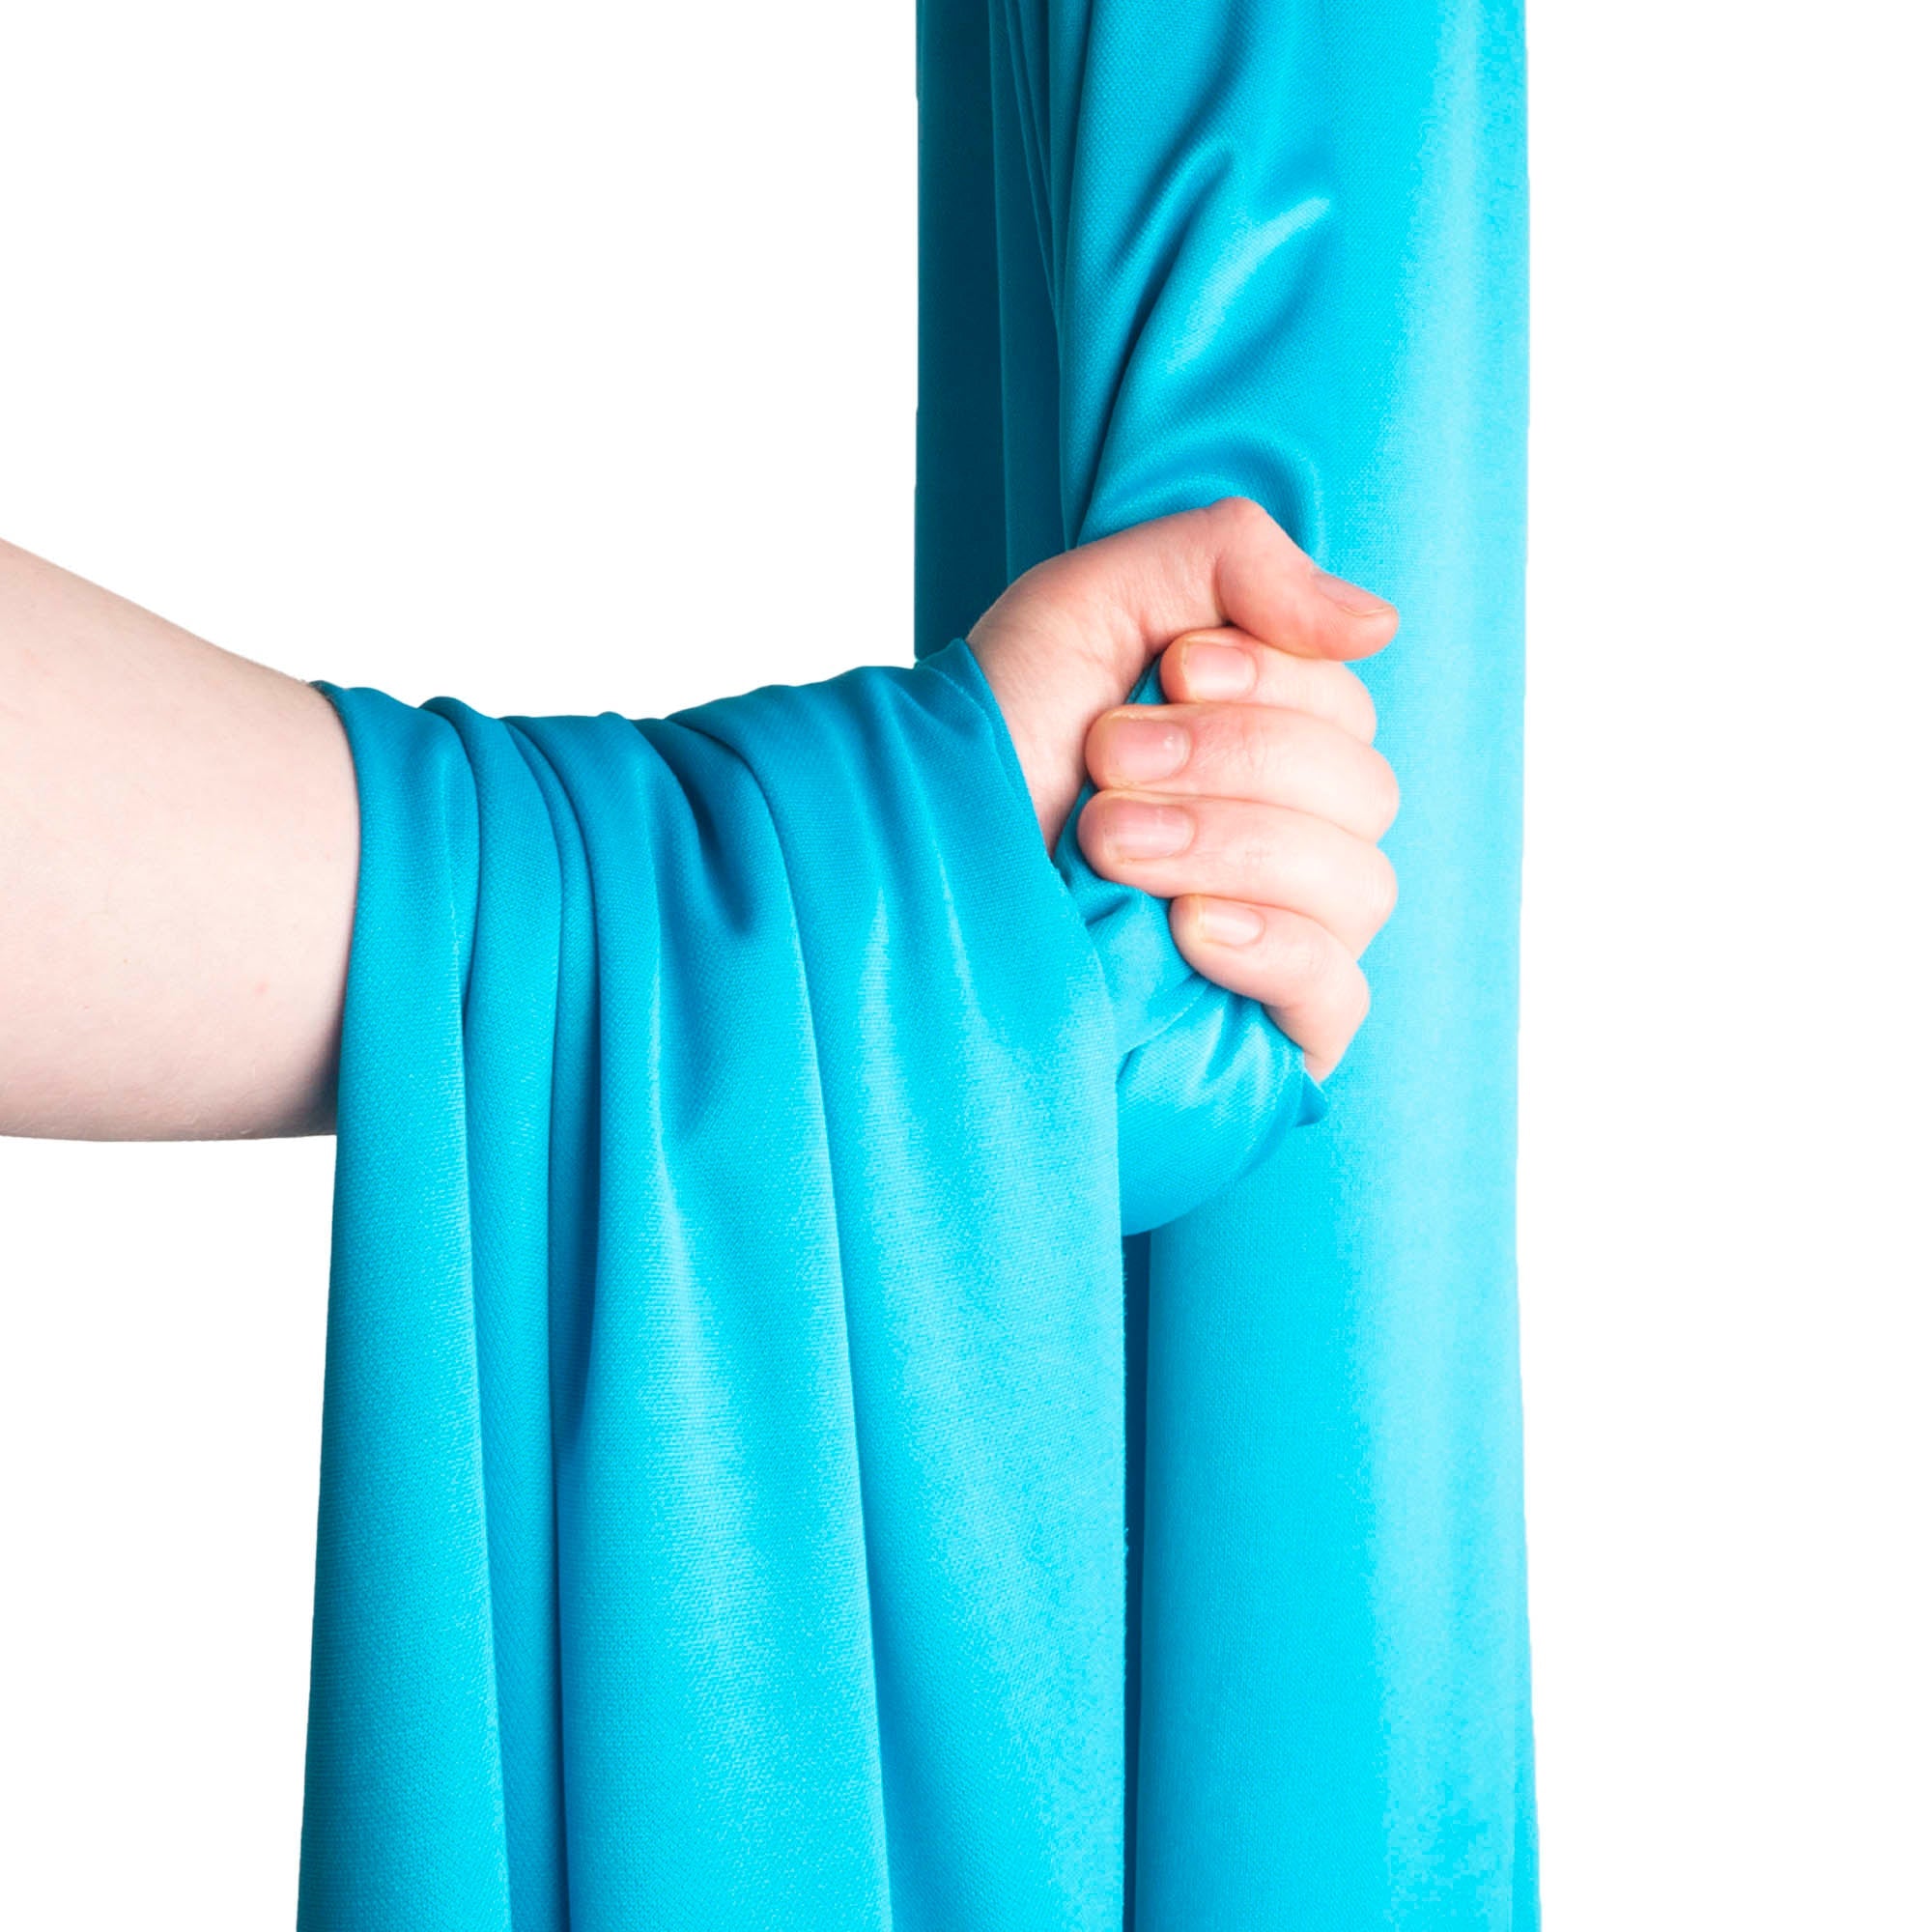 Firetoys youth aerial silk turquoise wrapped over hand